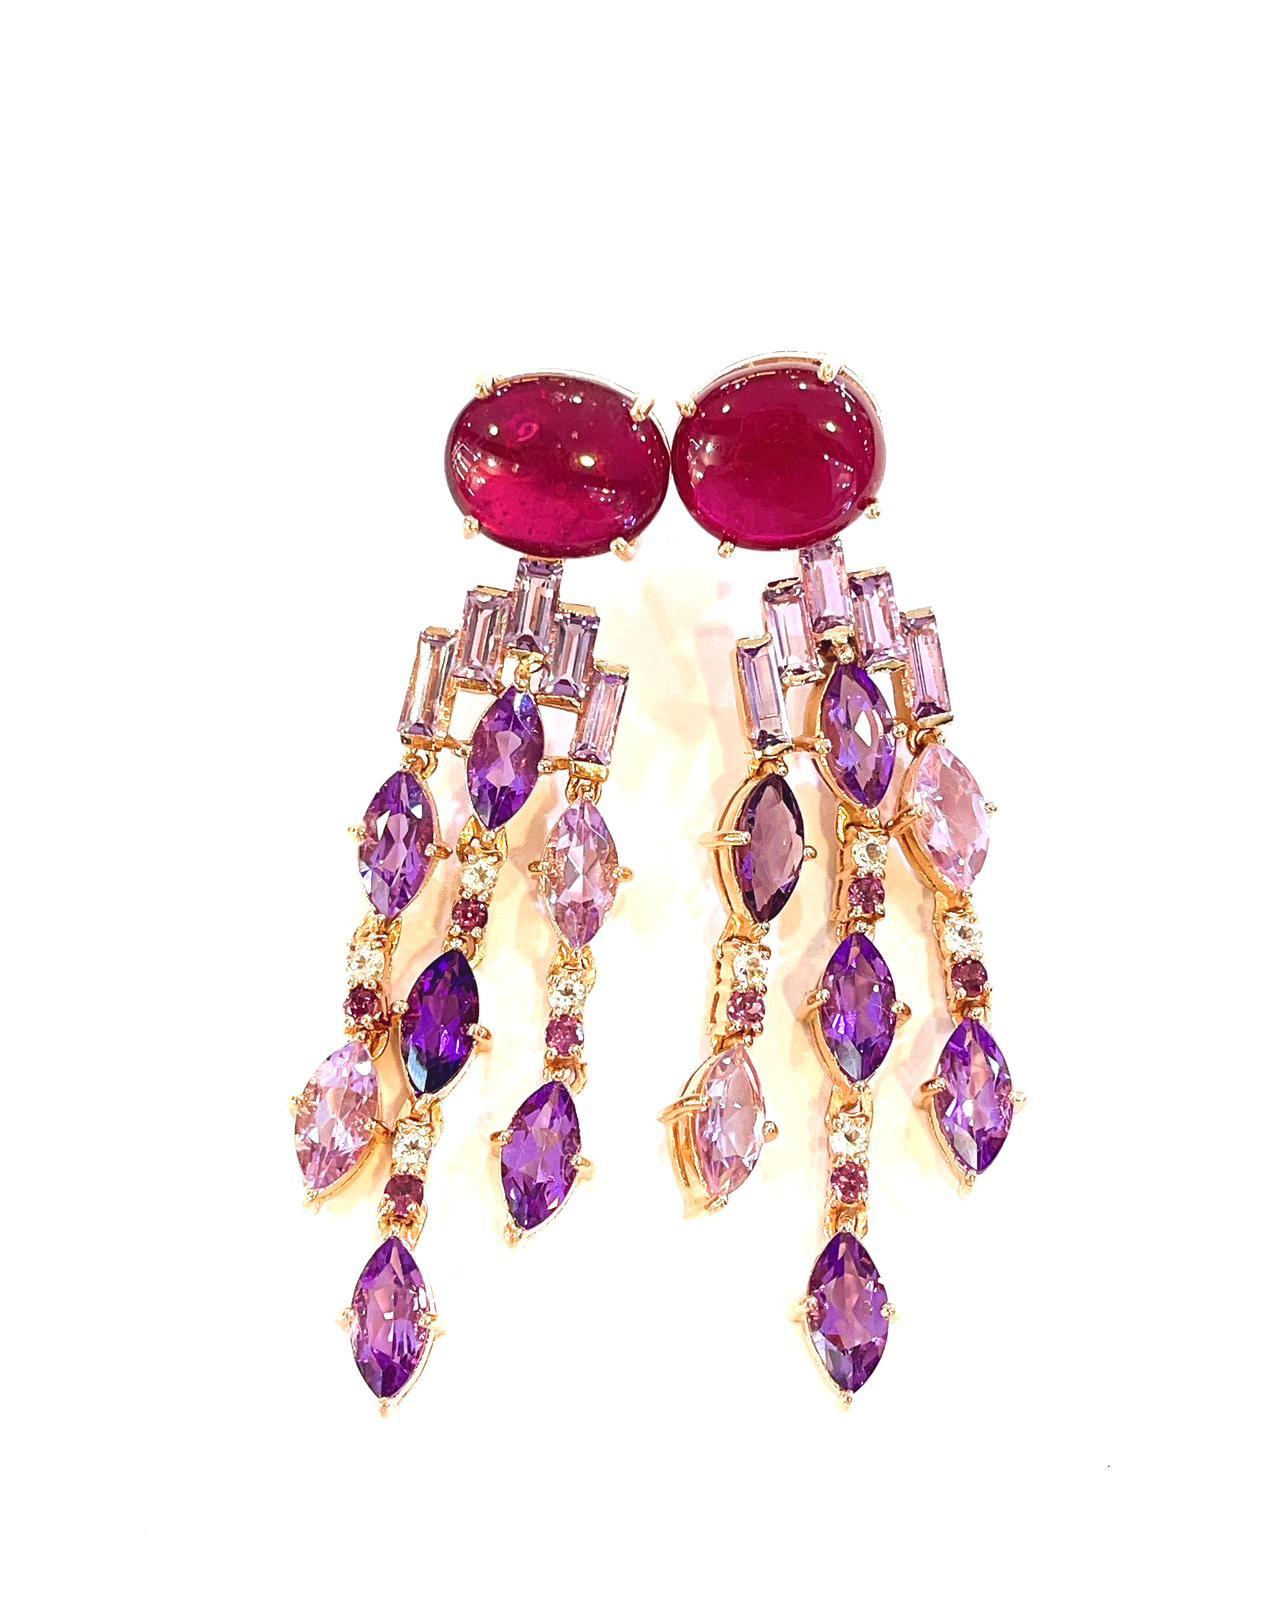 Bochic “Capri” Cascading Red Ruby & Purple Amethyst Earrings Set In 22K Gold & Silver 
Natural Red Ruby Cabochons - 30.28 Carats 
Natural Purple Amethyst - 16.74 Carats 
Red Rodorite and White Topaz - 2.65
Set in 22K Gold and Silver 950
This